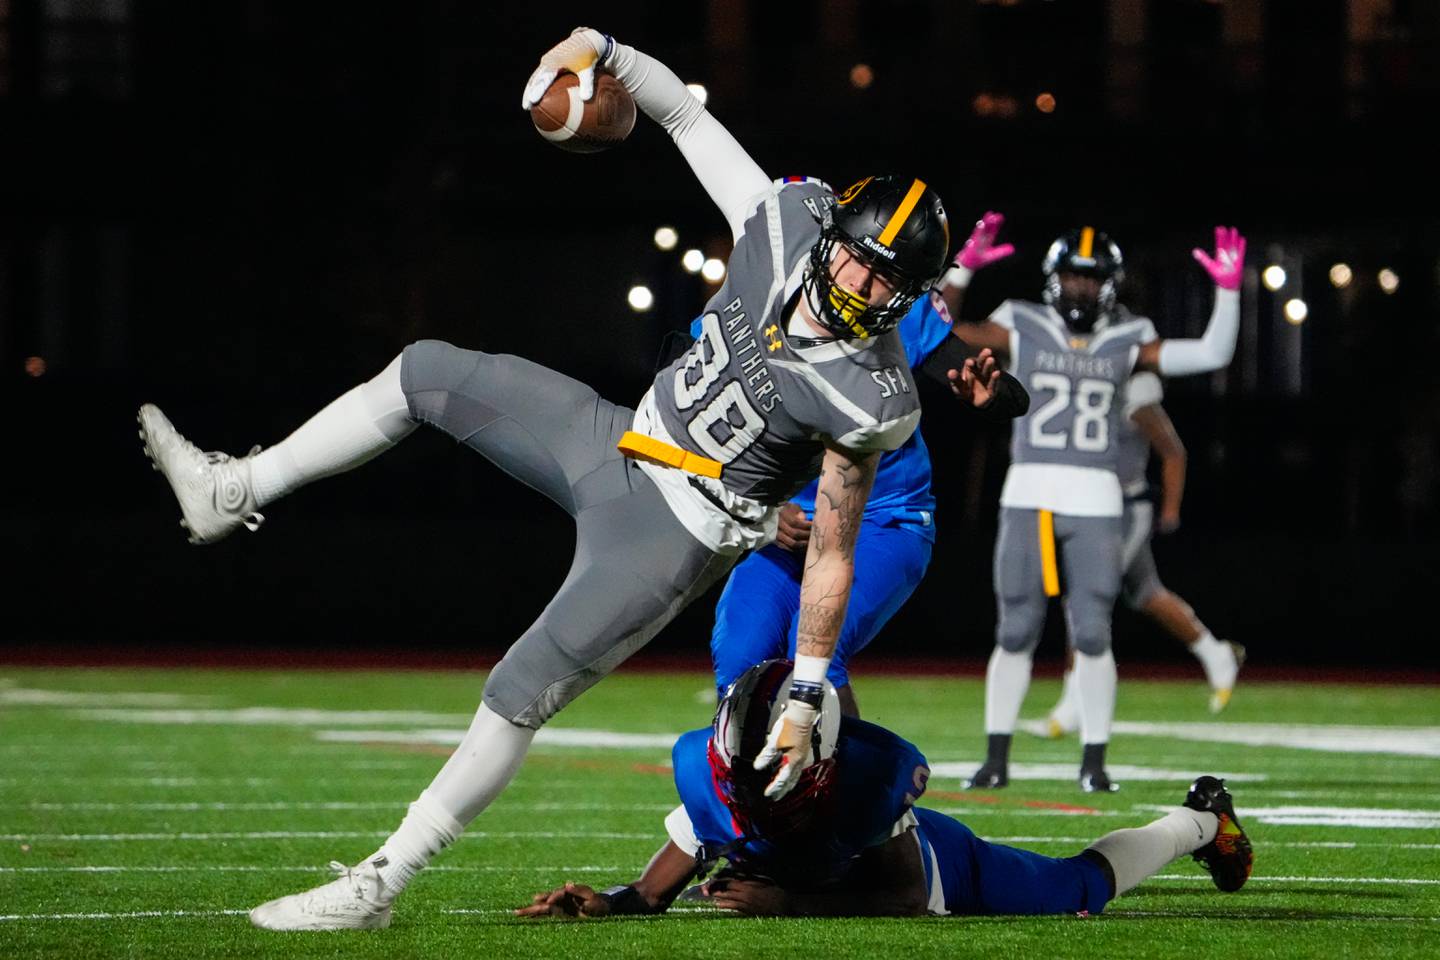 St. Frances senior tight end Chase Wilkens is tackled during the second quarter against National Christian Academy at Under Armour Stadium on Friday, Nov. 3, 2023.